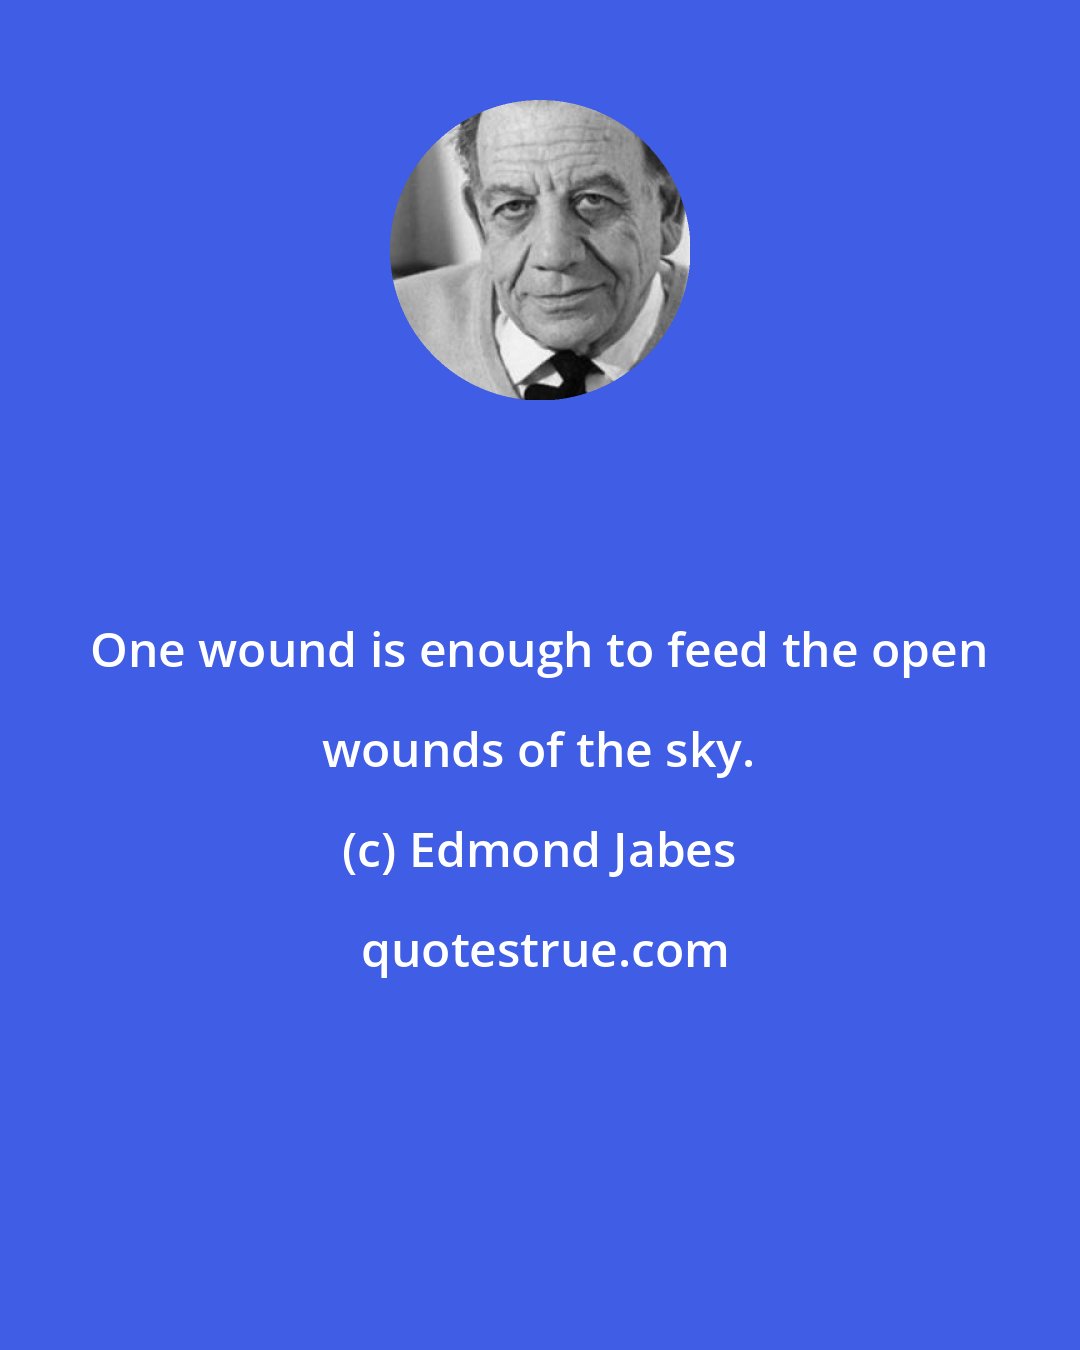 Edmond Jabes: One wound is enough to feed the open wounds of the sky.